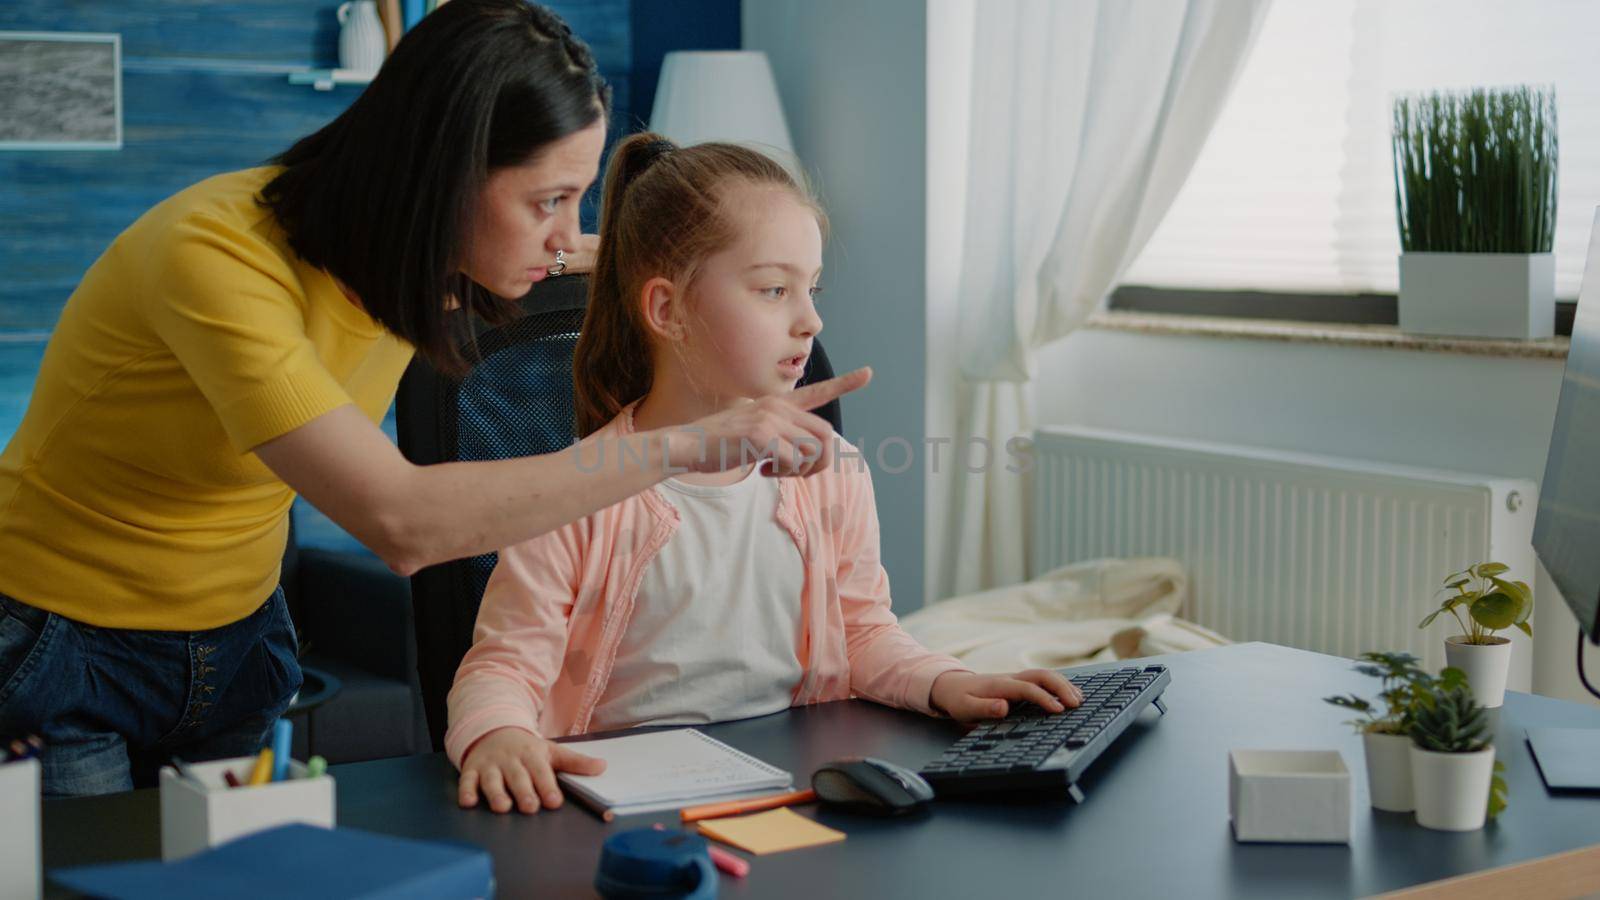 Mother helping young child with homework for remote education and knowledge. Schoolgirl receiving assistance from parent while using computer and notebook for online class lesson.